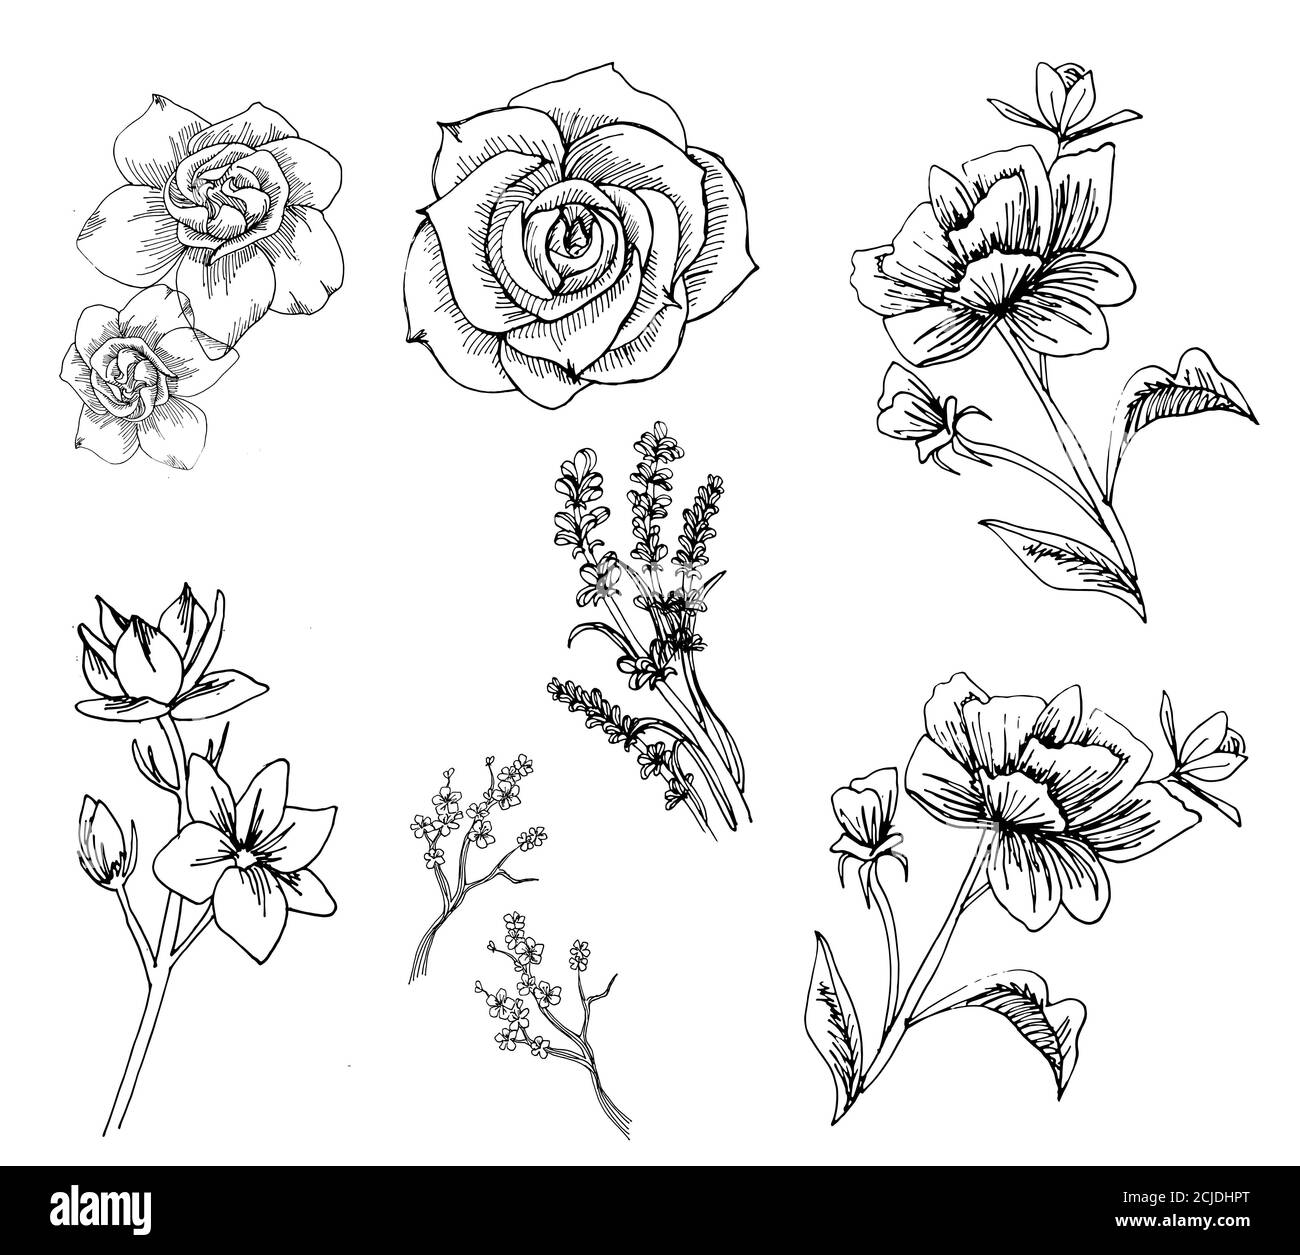 Rose Flower Illustration Pencil Vector Drawing fully Editable Stock Photo